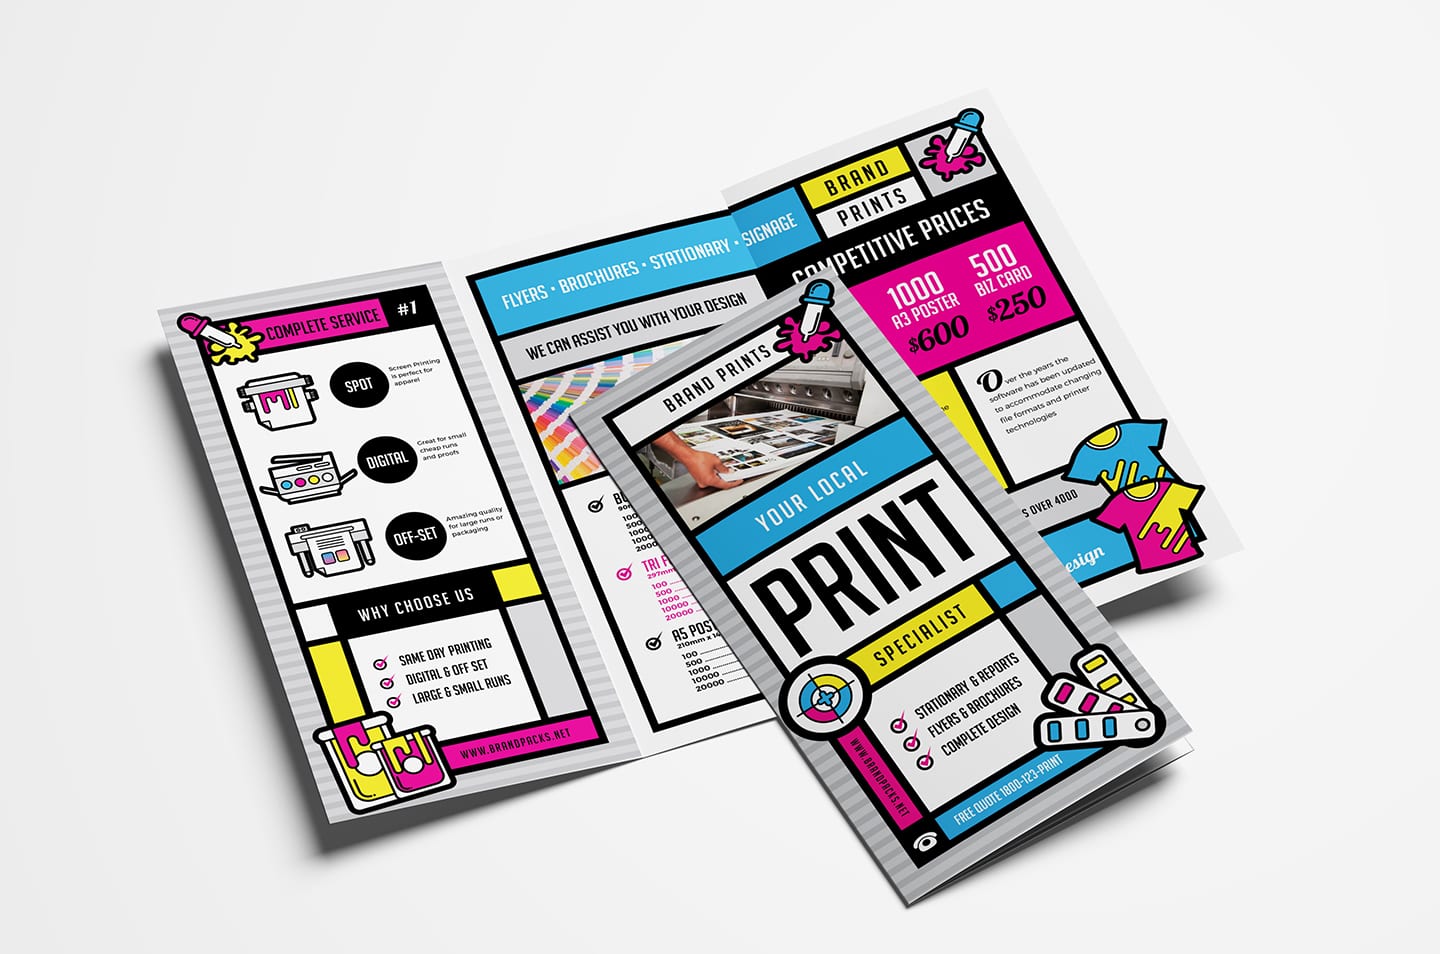 Free Print Shop Templates for Local Printing Services - BrandPacks